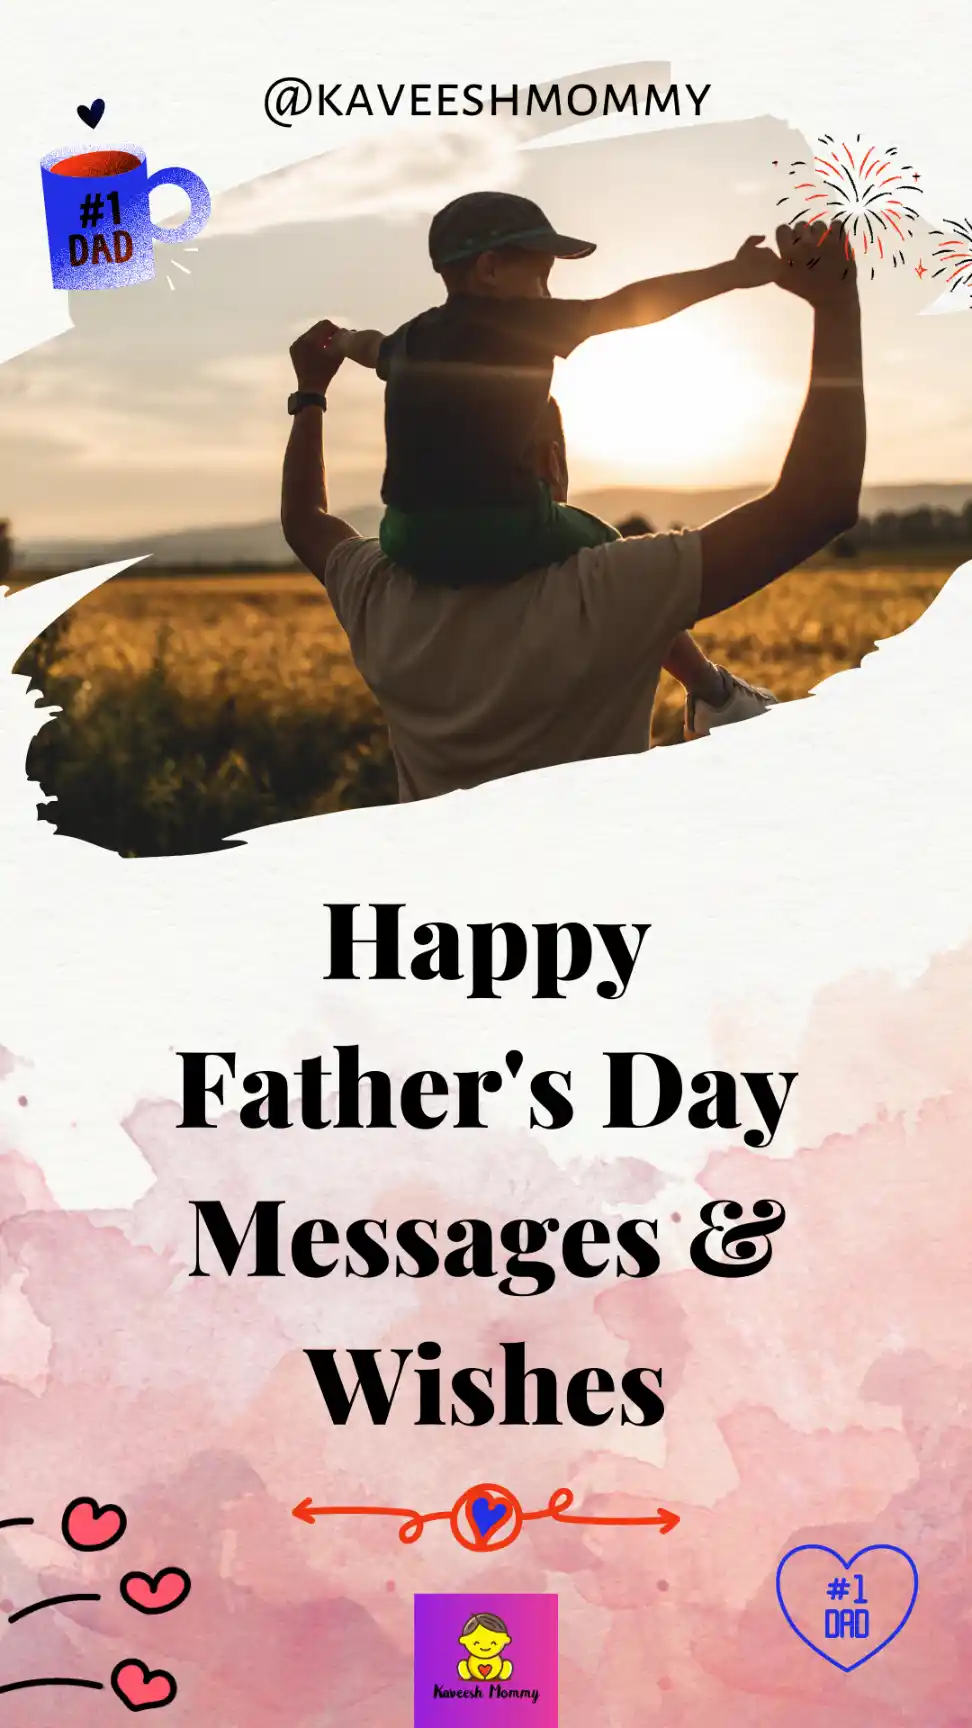 list of fathers day quotes, messages, and wishes - kaveesh mommy 